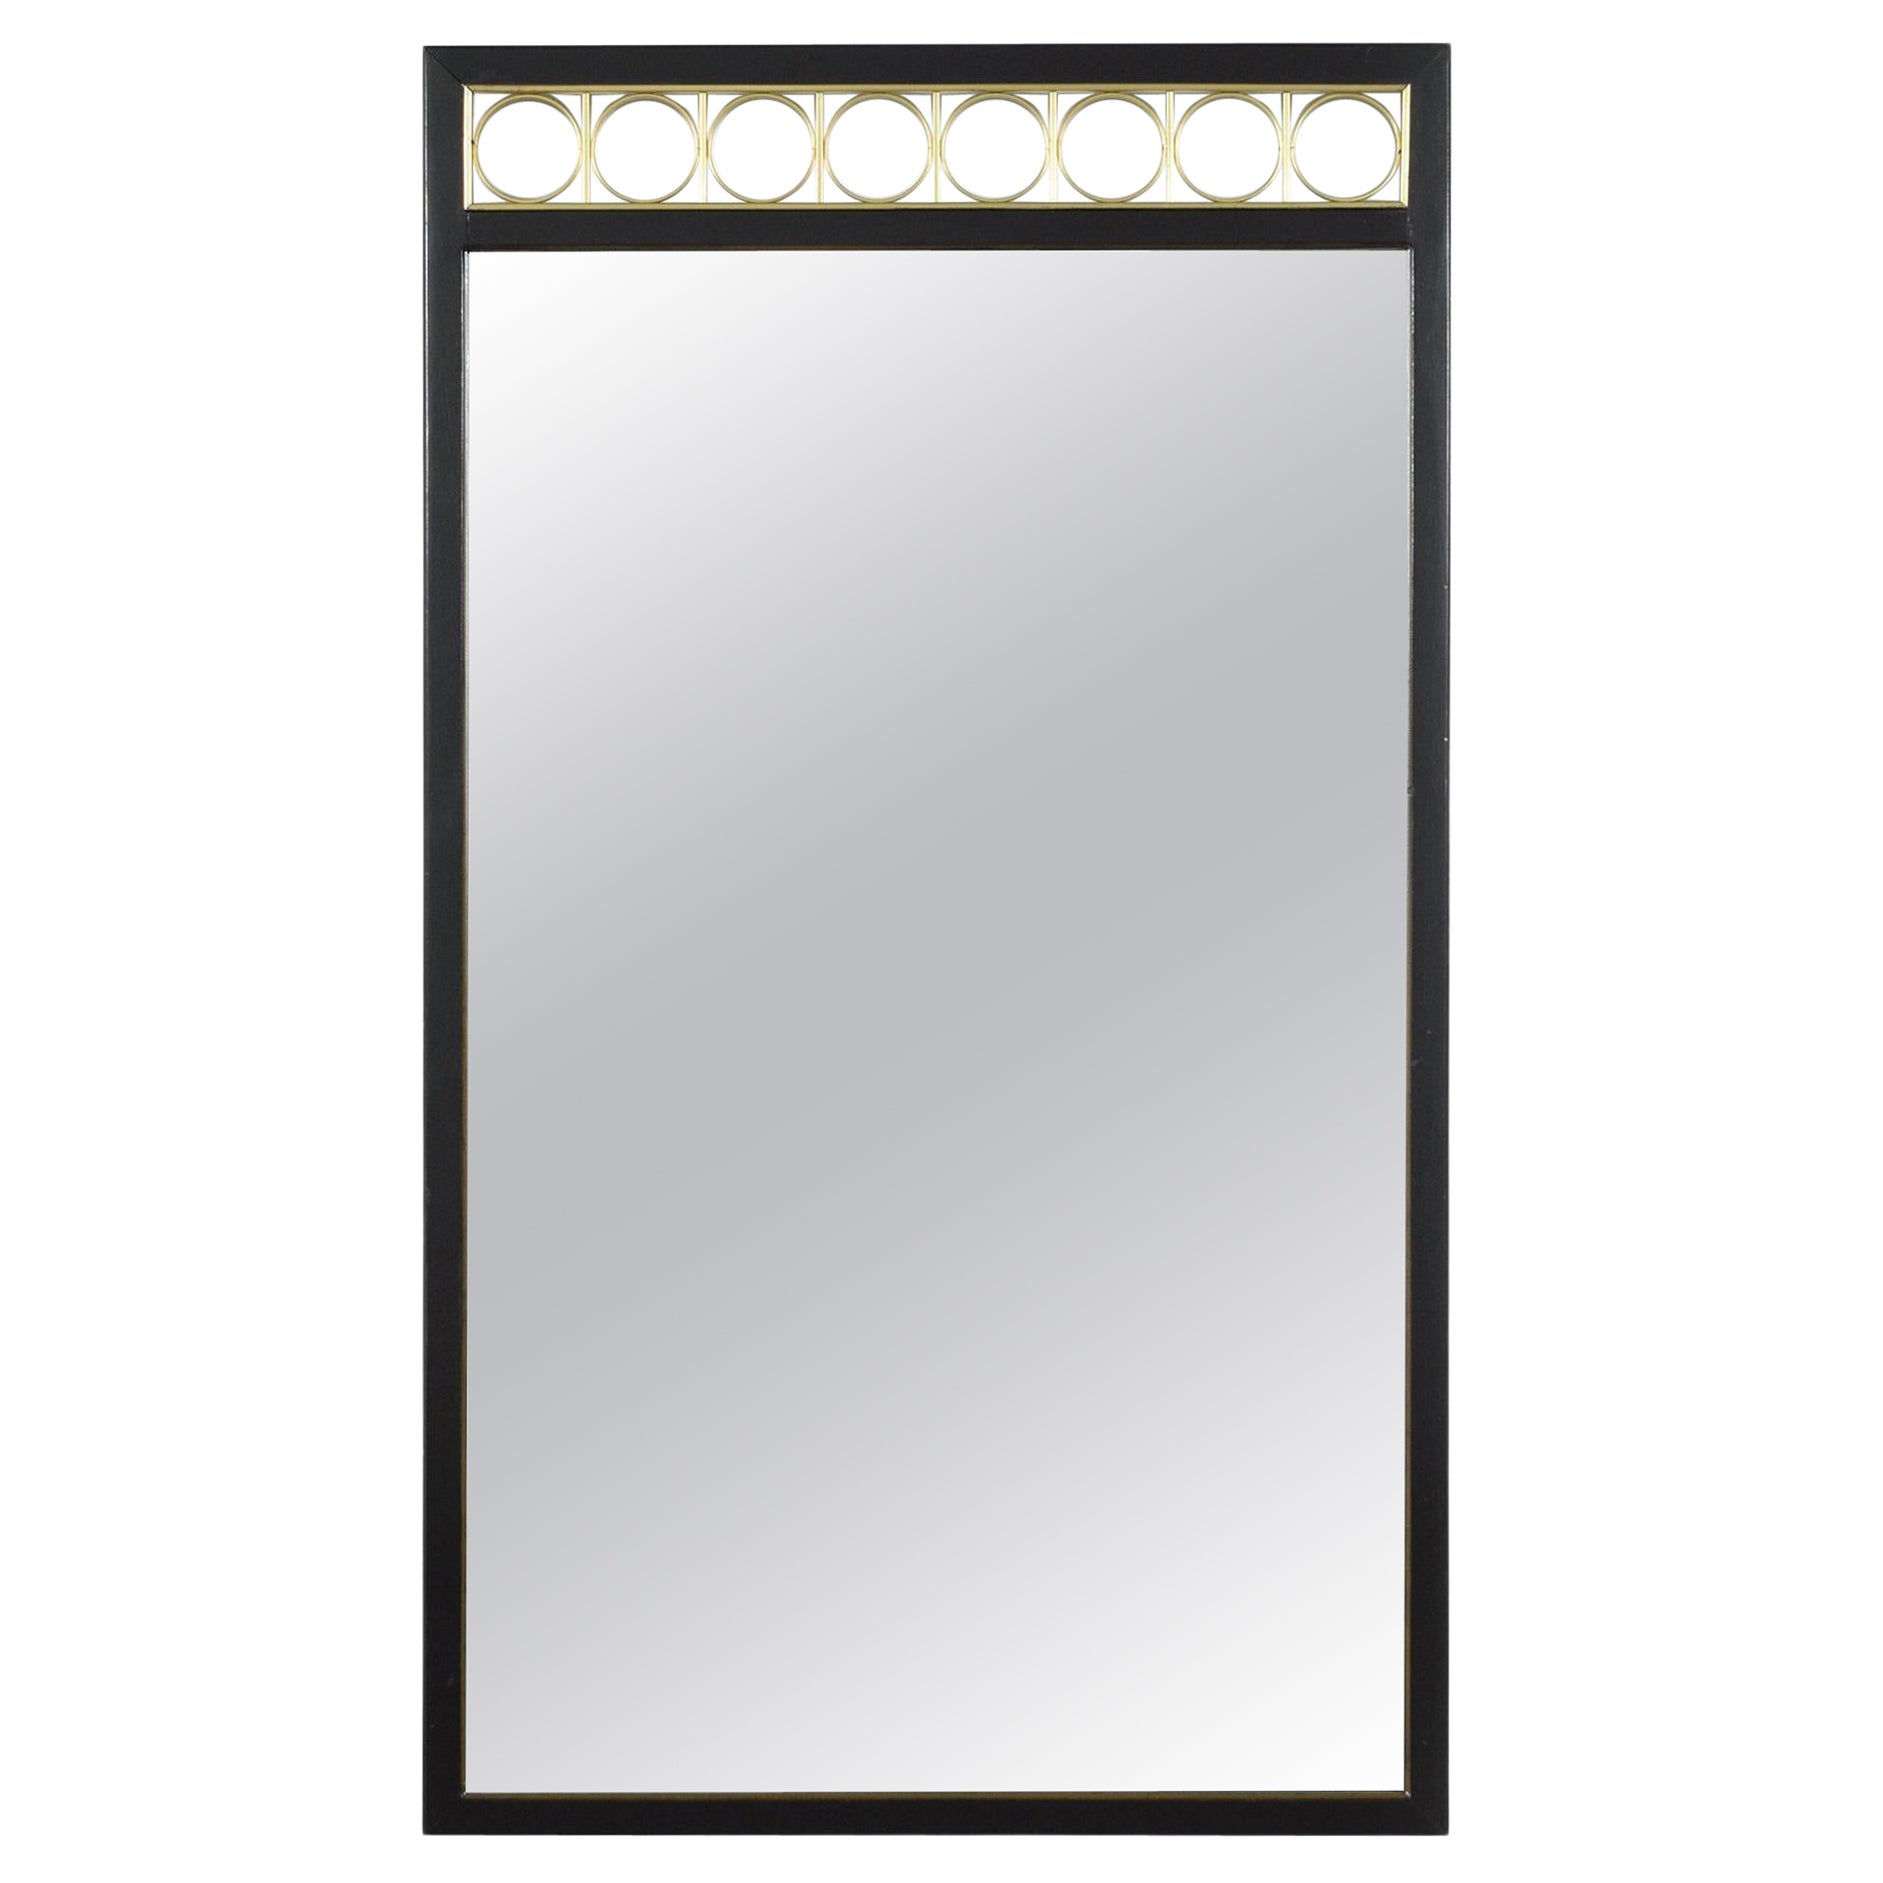 Elegant Midcentury Mahogany Wall Mirror: Timeless Sophistication for Modern Home For Sale